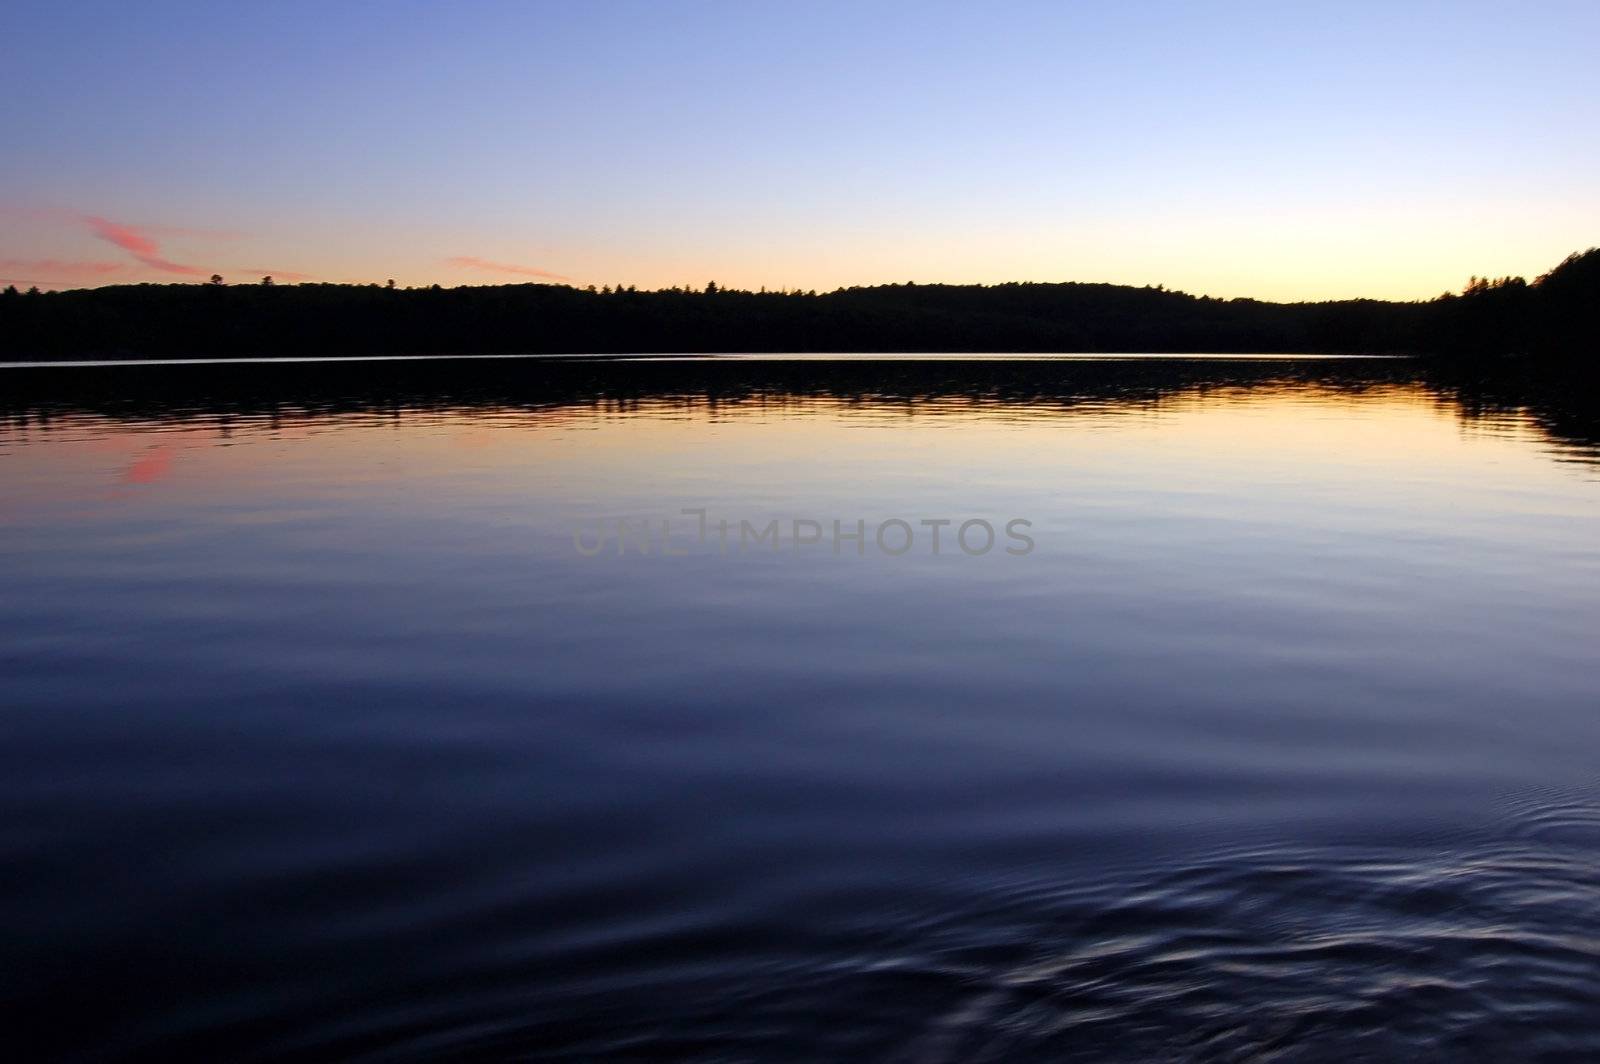 Sunset and canoe trip in calm lake in Algonquin Park